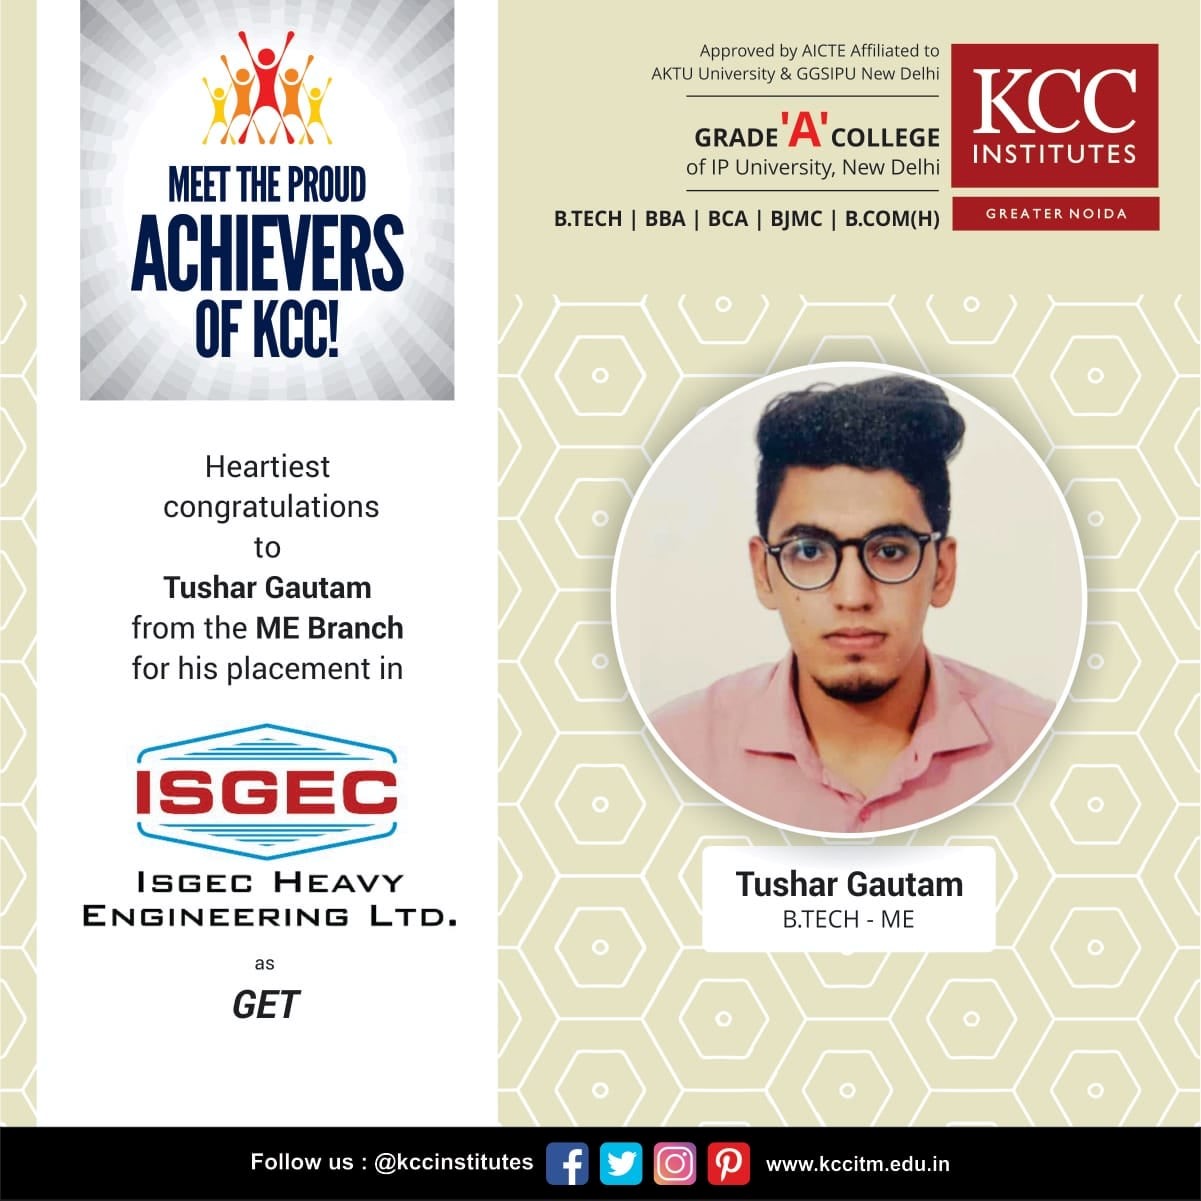 Congratulations Tushar Gautam from B.Tech ME Branch for getting placed in Isgec Heavy Engineering Ltd. as GET.